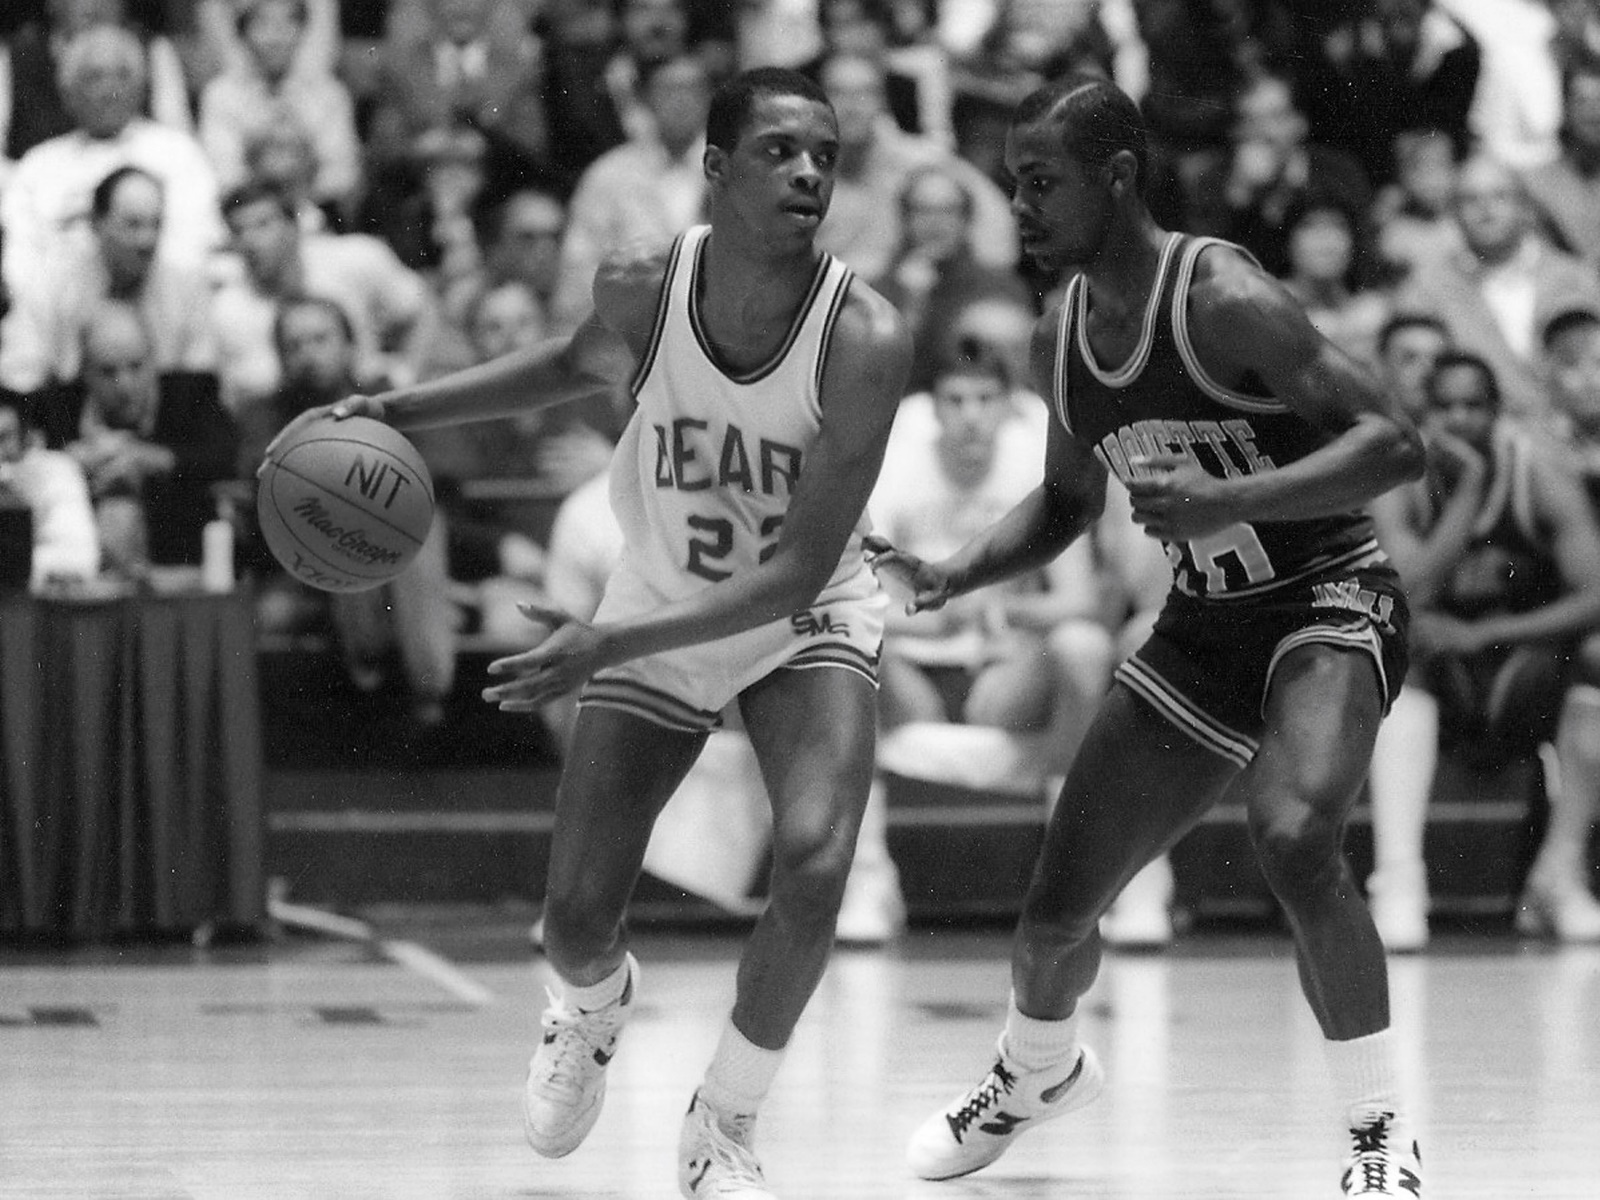 A photo from the mid-1980s of Winston Garland playing basketball for then-Southwest Missouri State University